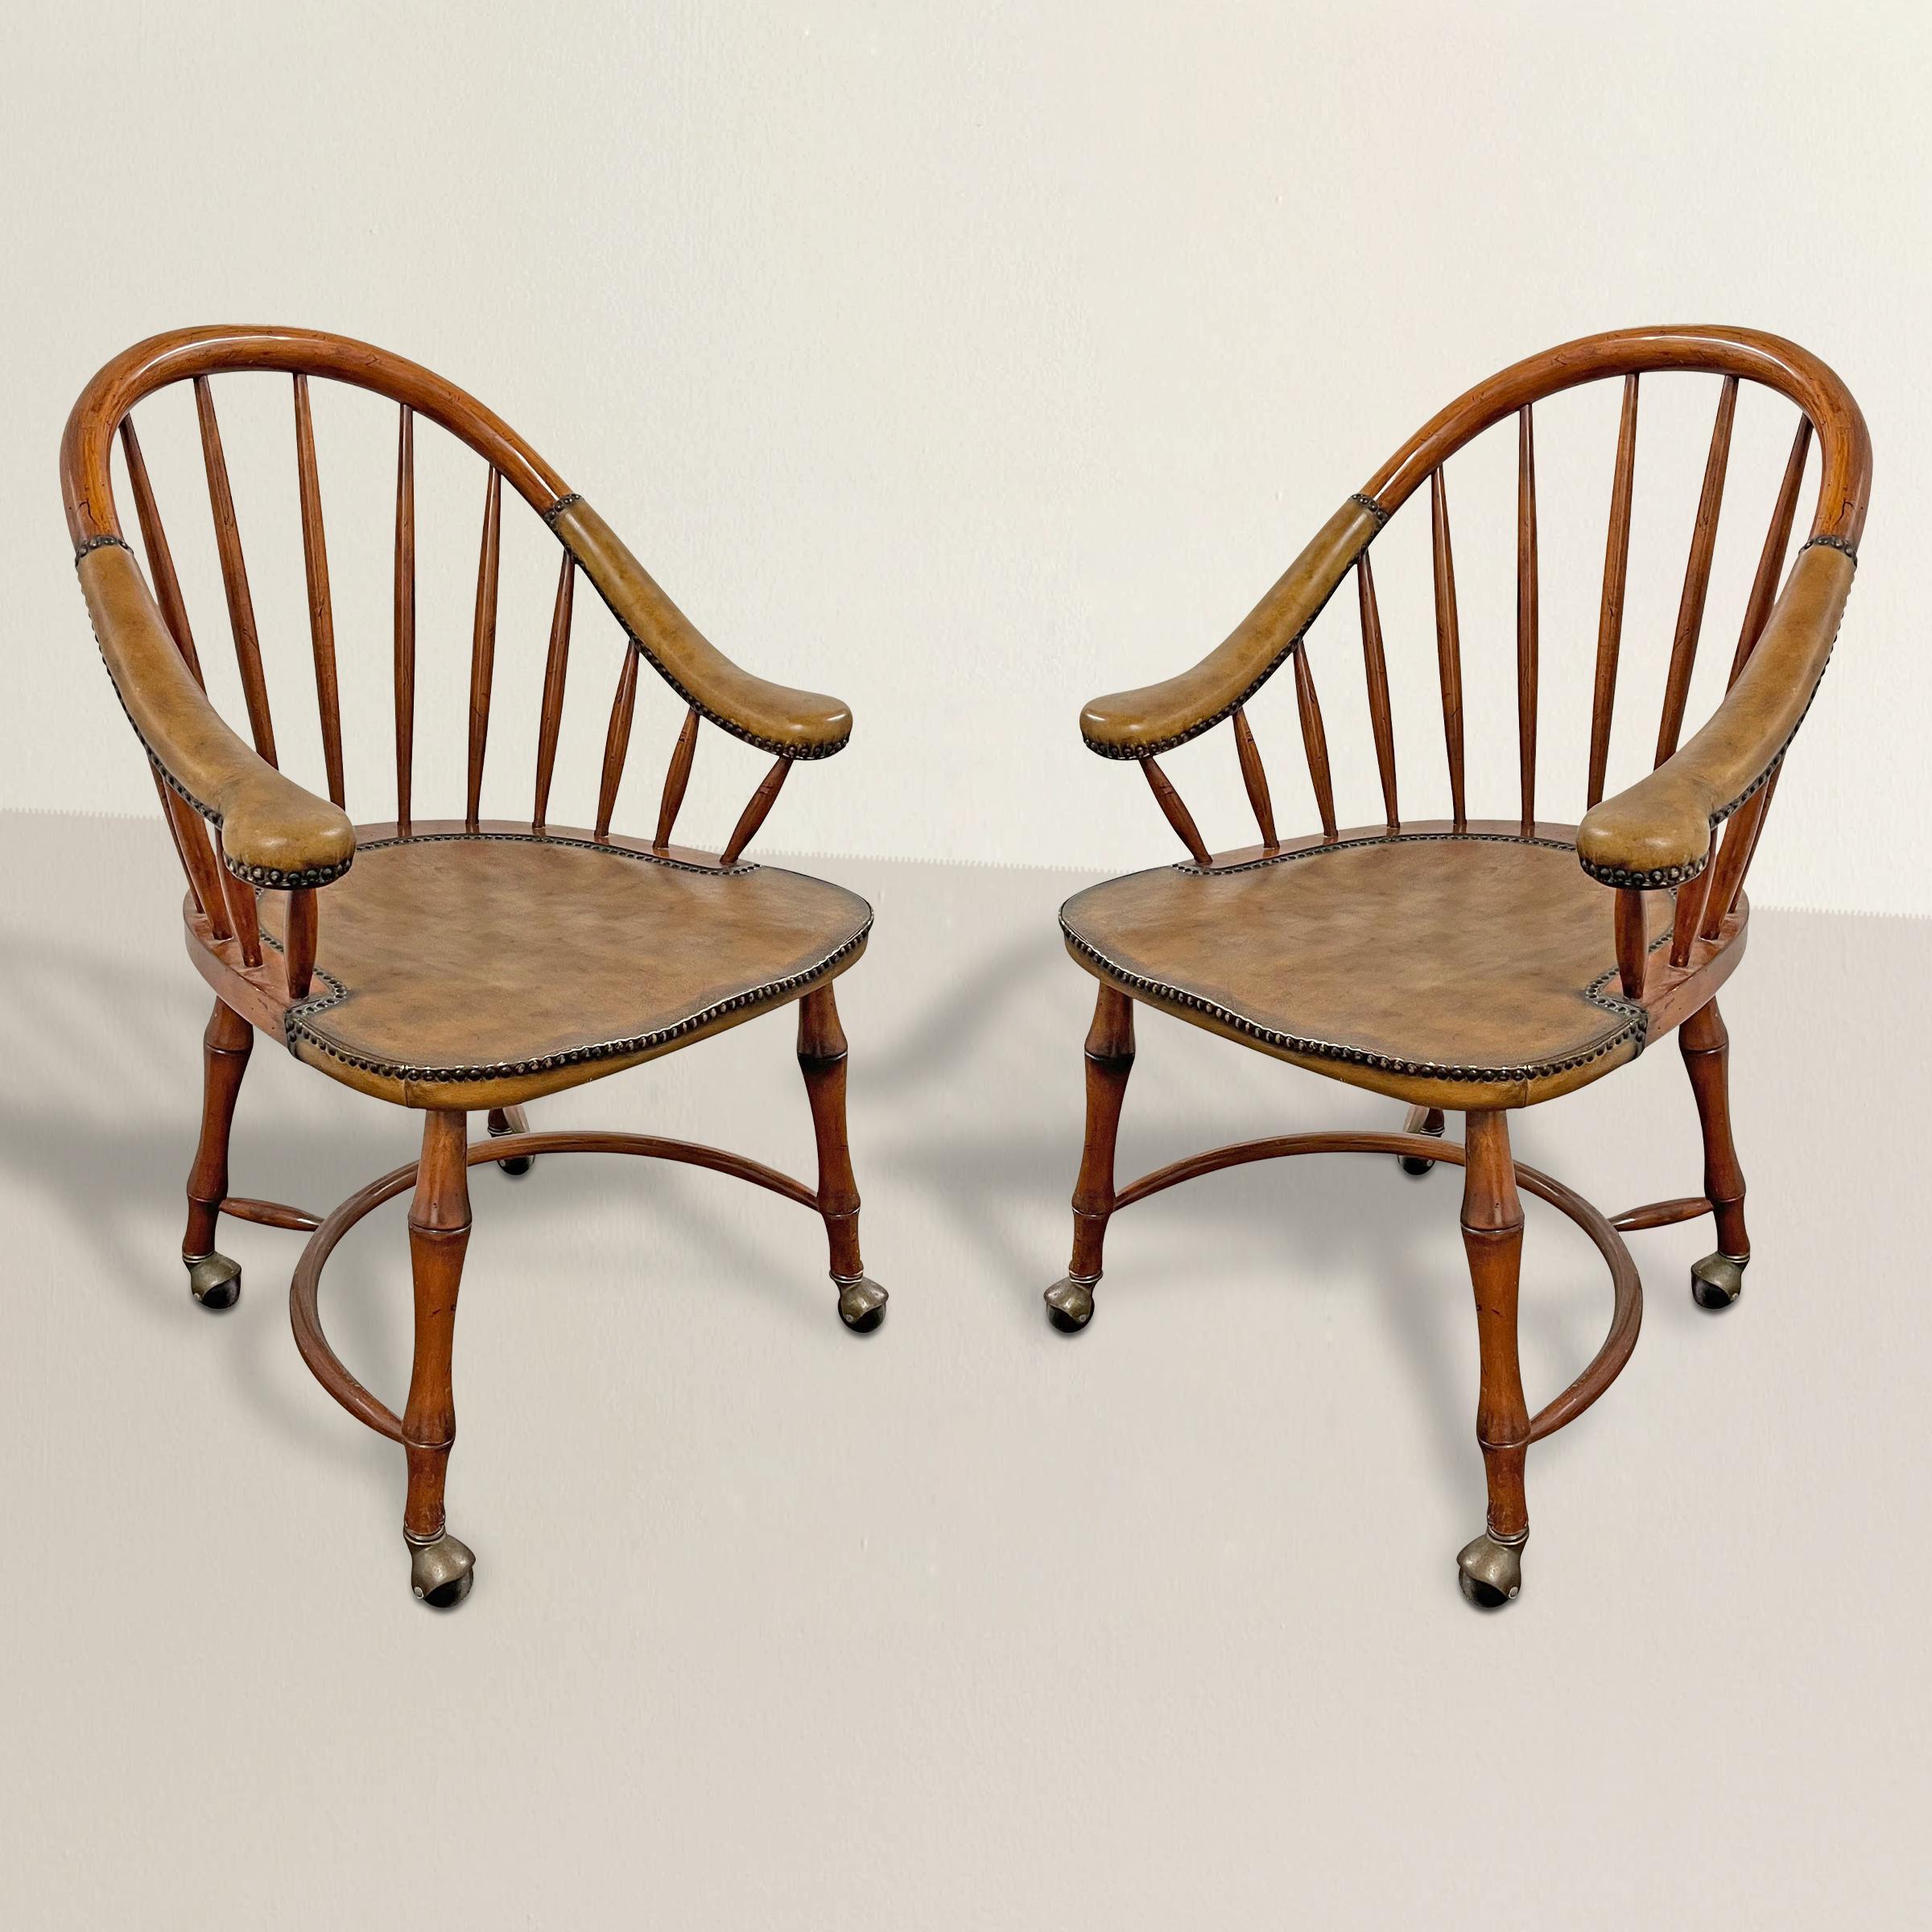 This pair of vintage 1970s American game chairs are a tasteful homage to early American Windsor design. With their hoop backs, gently sloping upholstered arms, and legs intricately carved to mimic bamboo, these chairs seamlessly merge classic